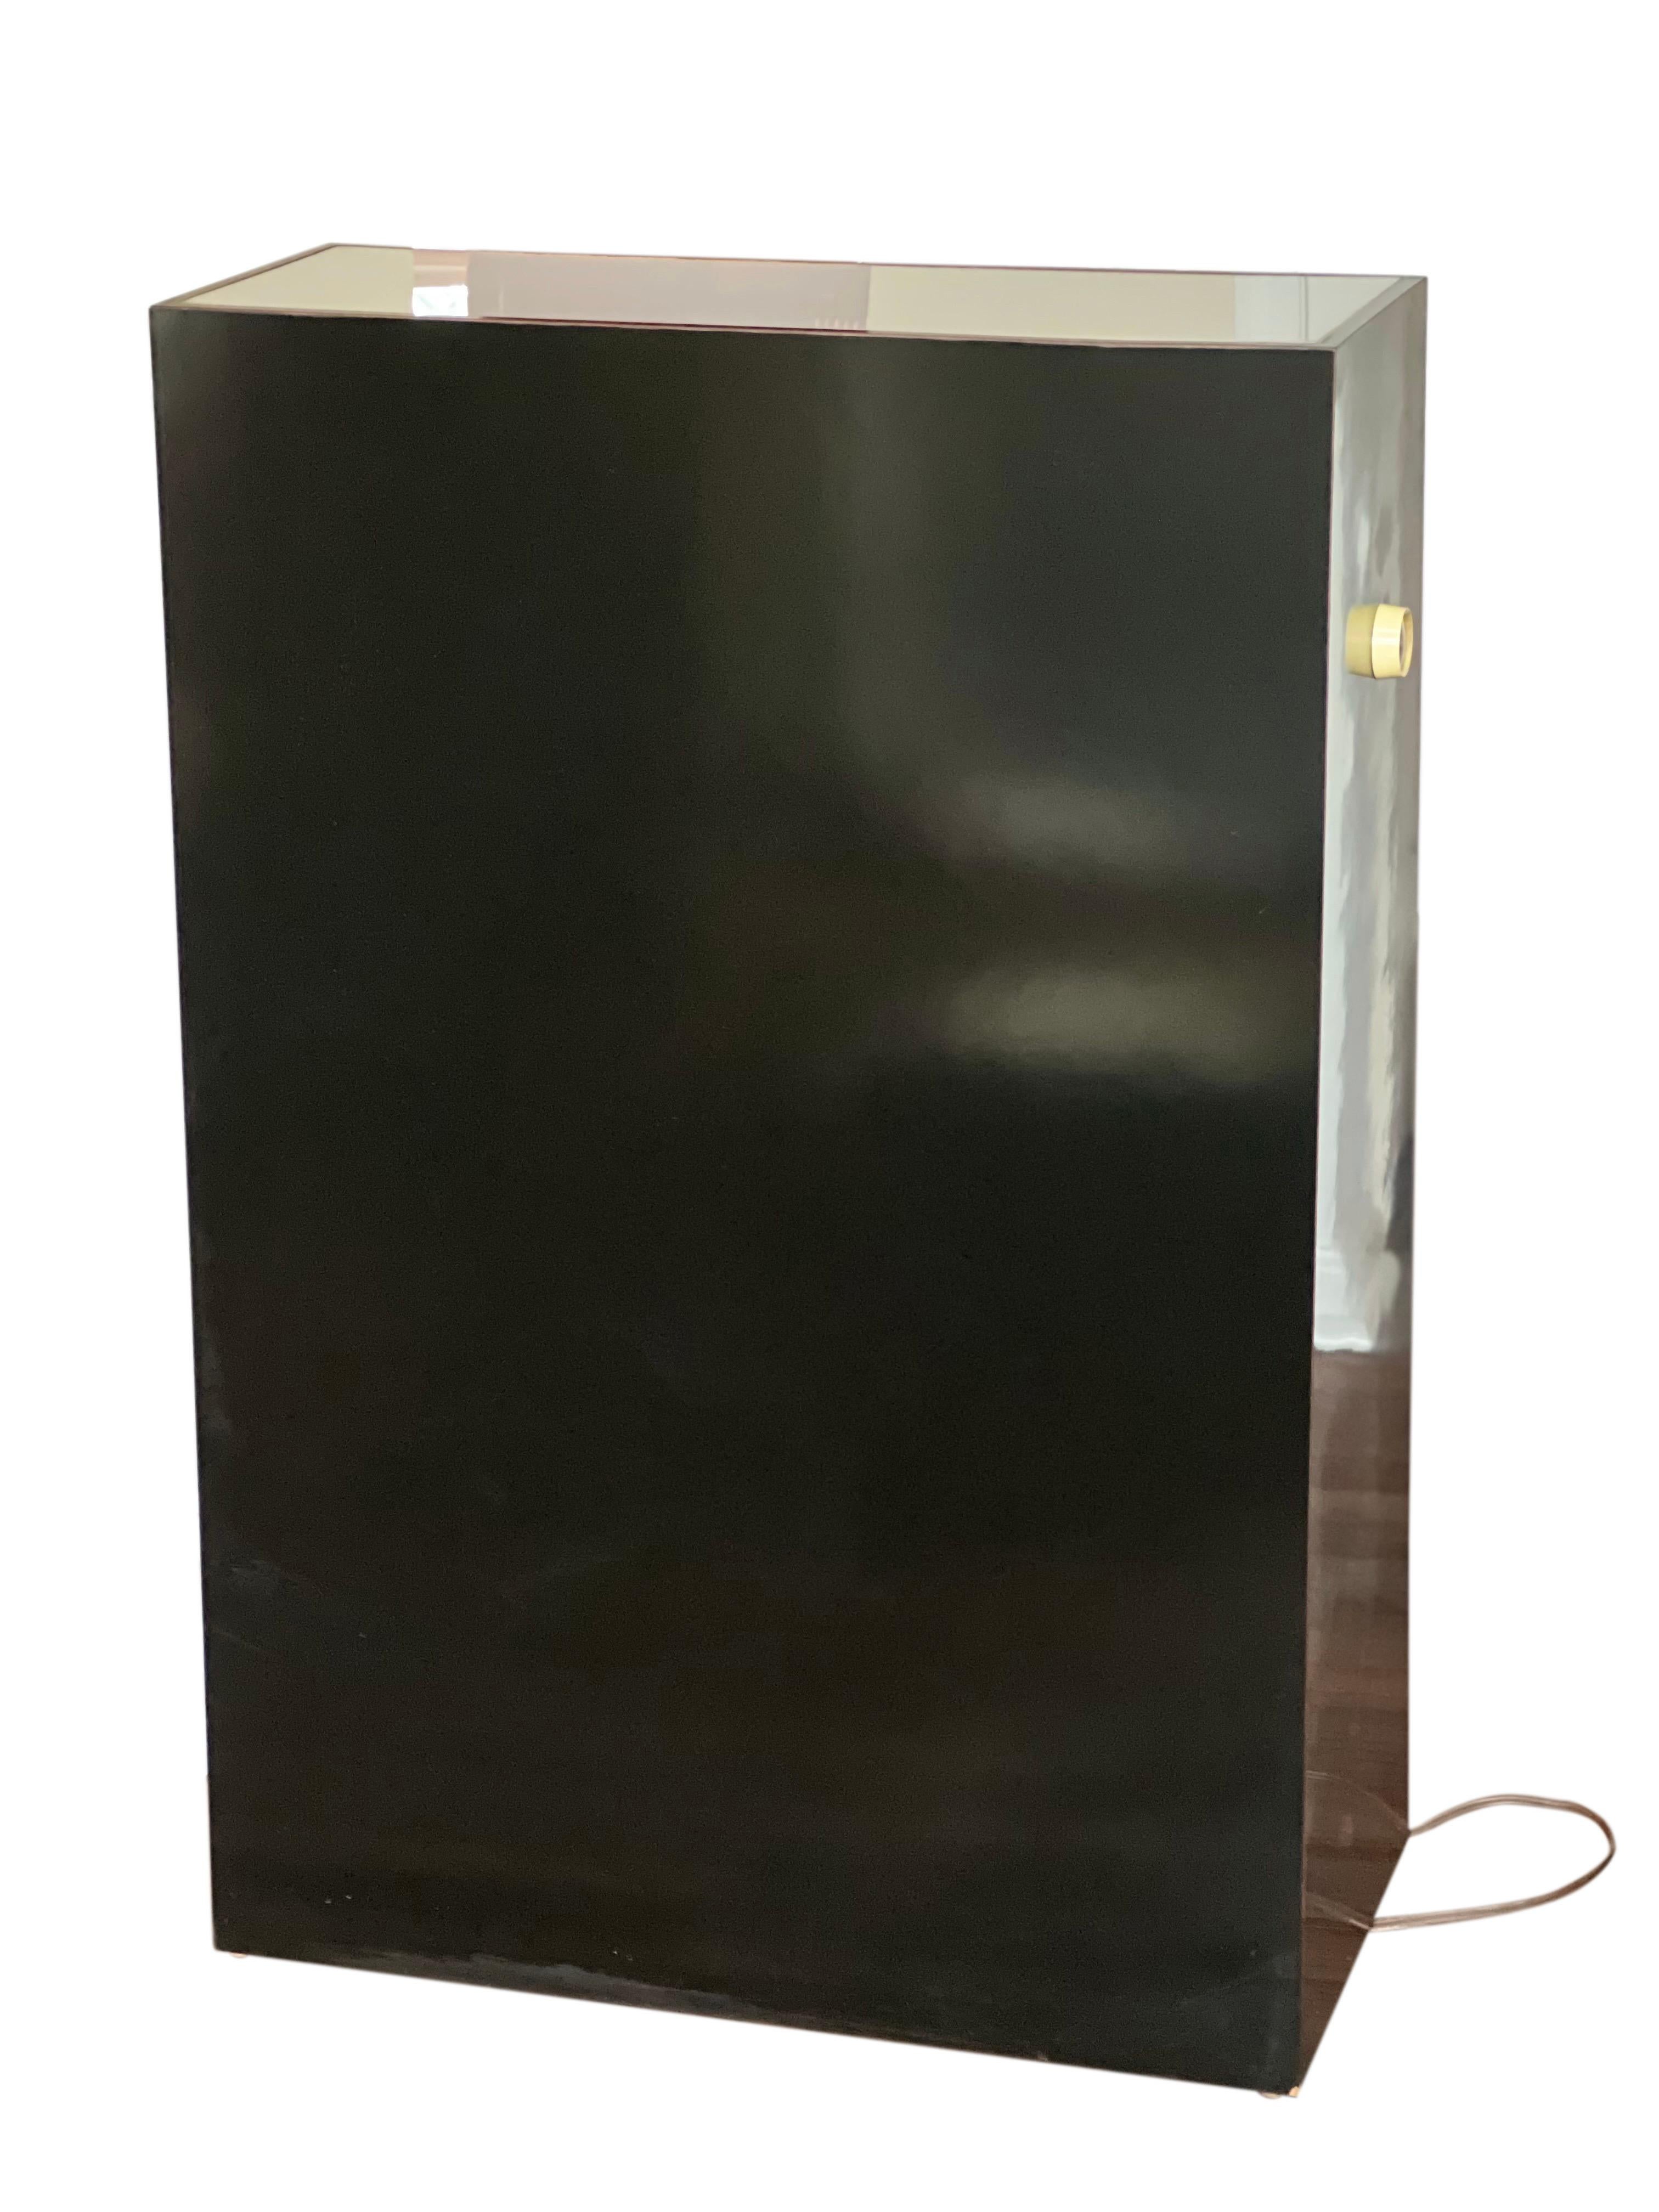 Fabulous all original vintage illuminated glossy black pedestal with an opaque white acrylic inset top.

The pedestal creates a luminous glow perfect to display your favorite sculpture or objets d’art with adjustable lighting. Crafted of wood